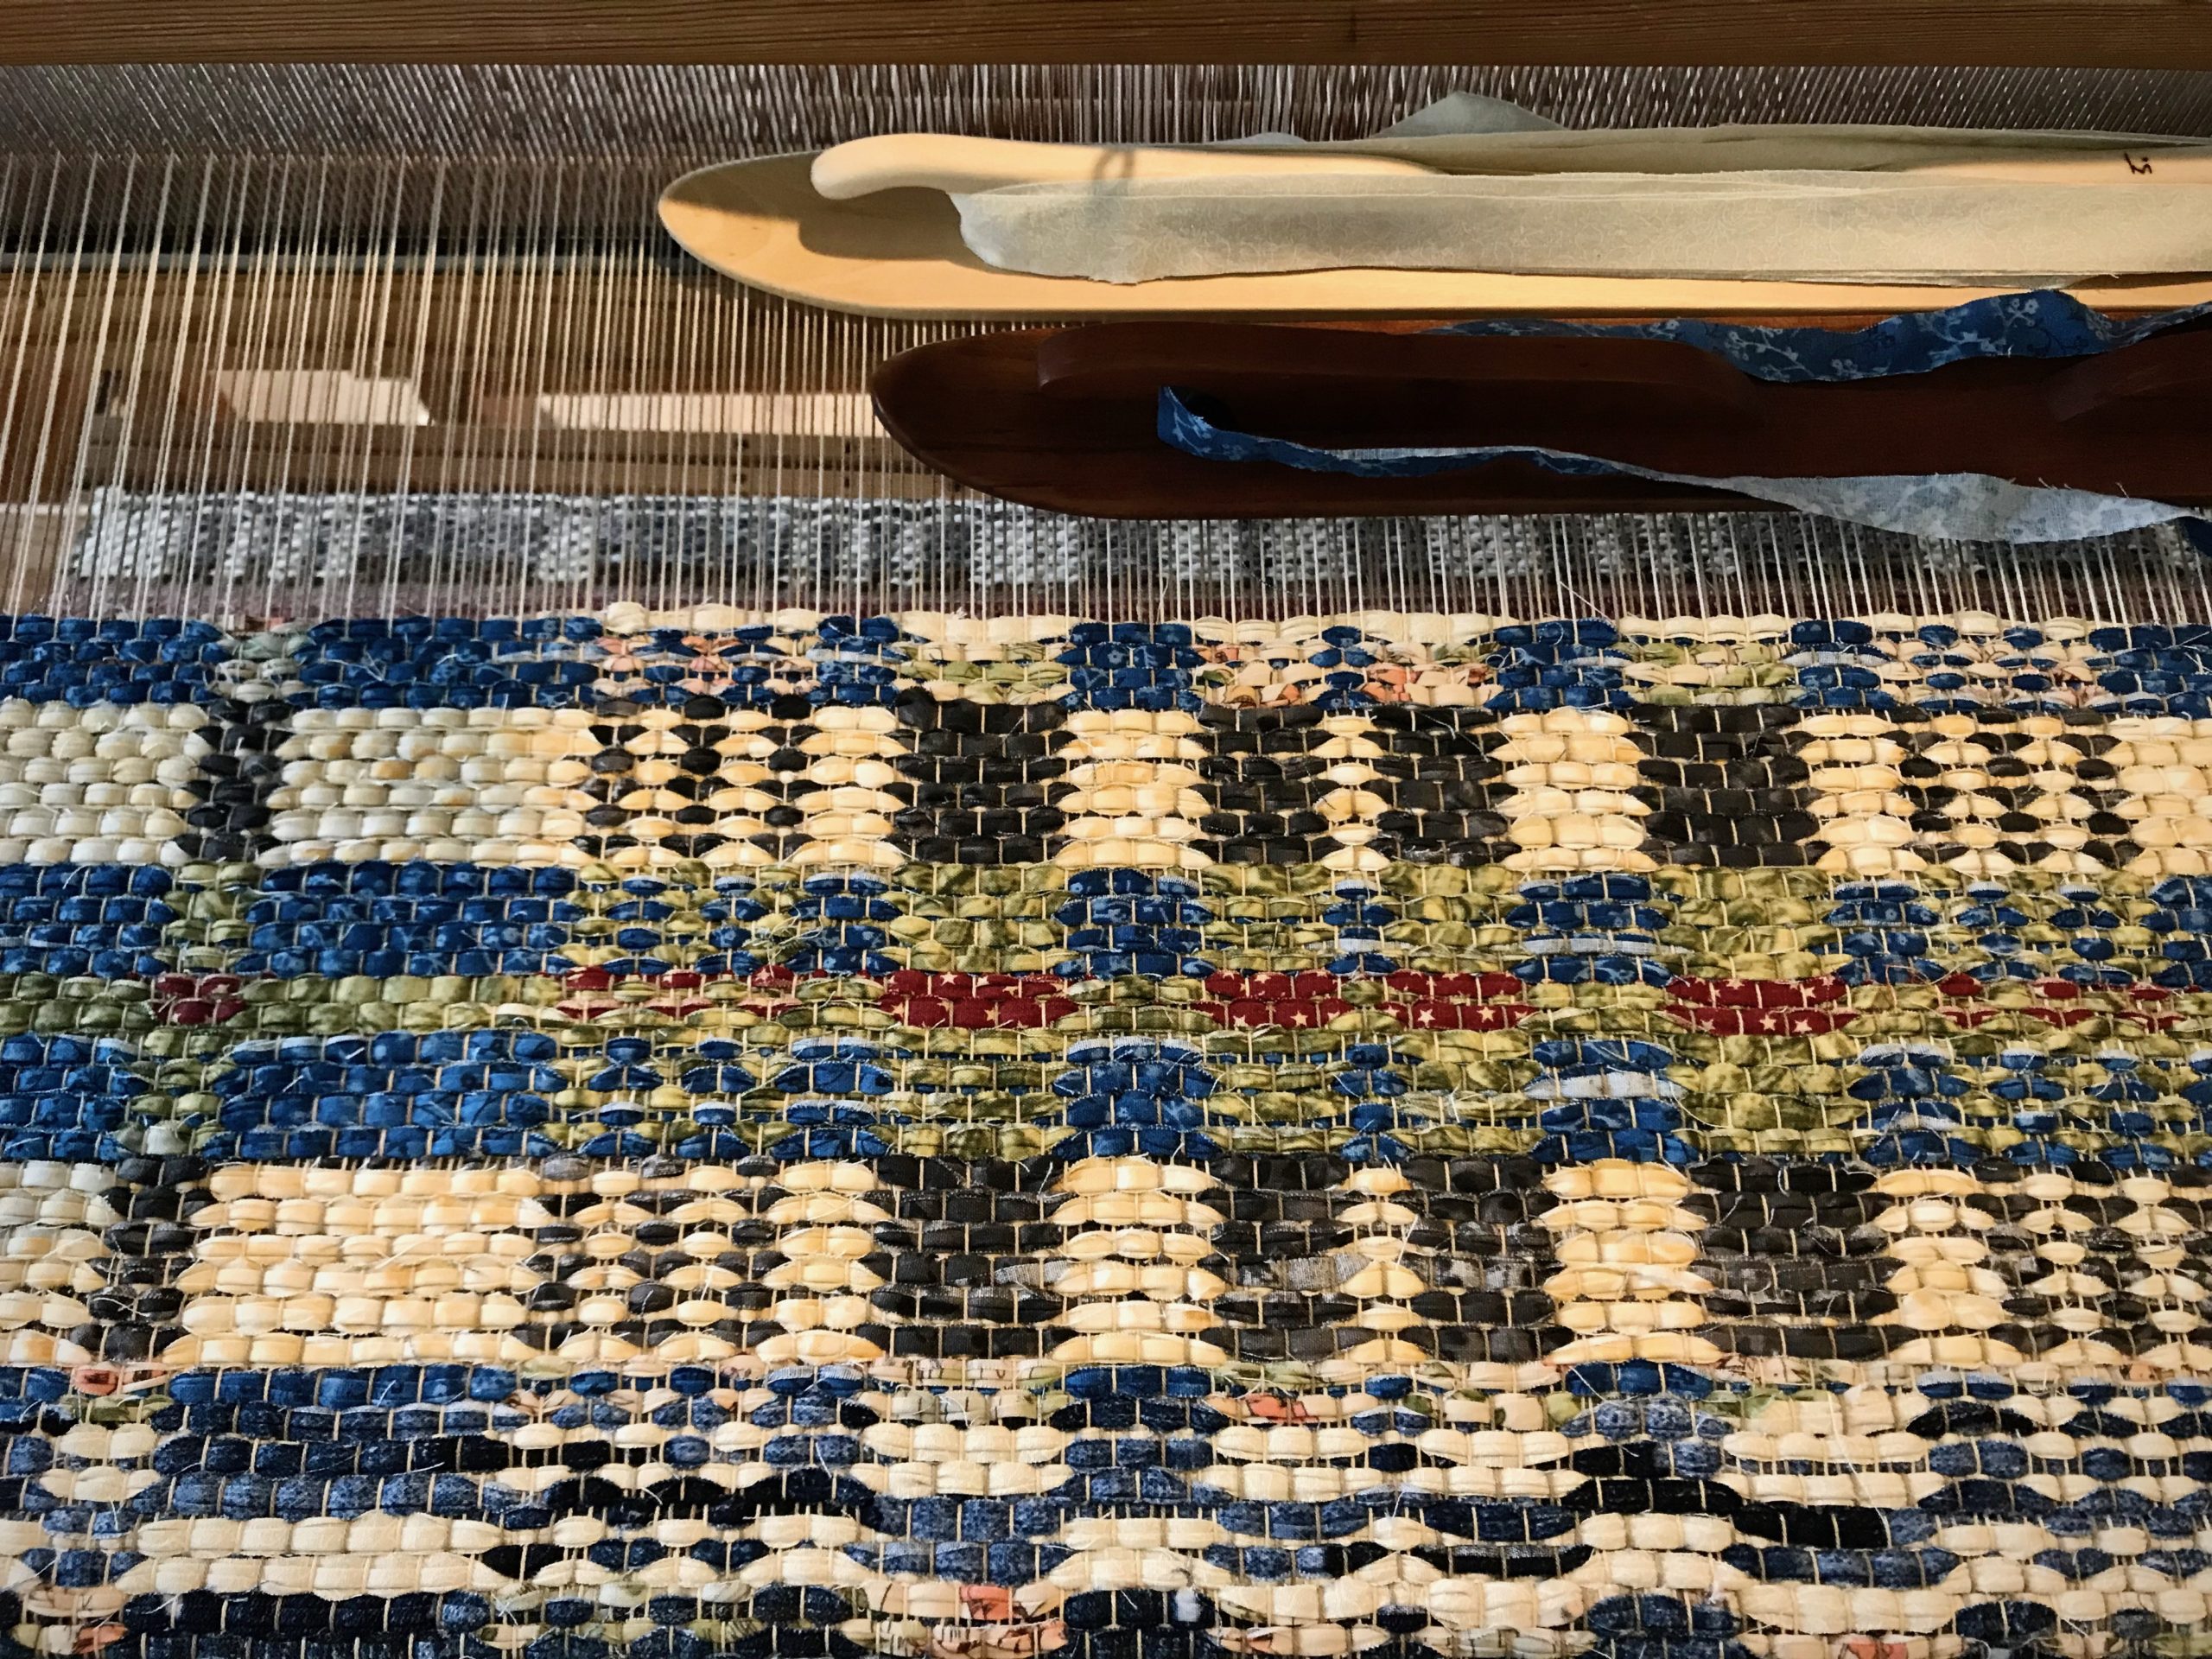 Canadian Collection Blanket and Rug Wool for Handweavers (Weave, Weaving)